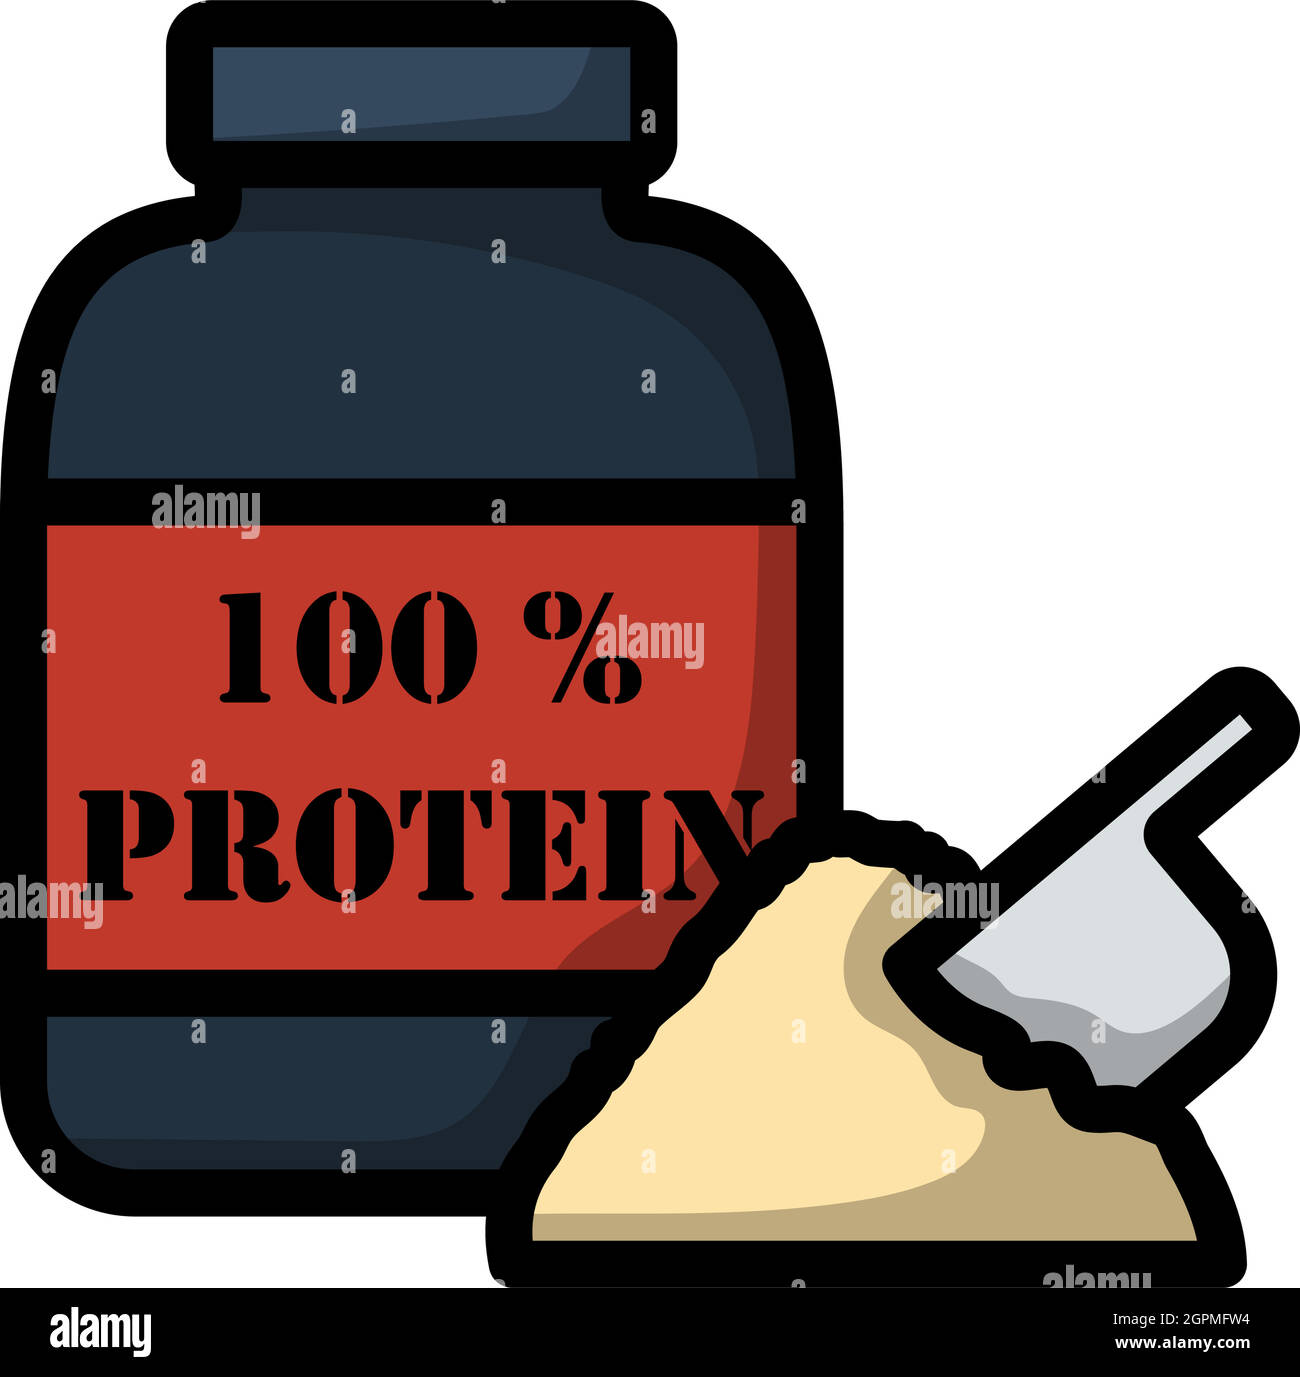 https://c8.alamy.com/comp/2GPMFW4/icon-of-protein-conteiner-2GPMFW4.jpg